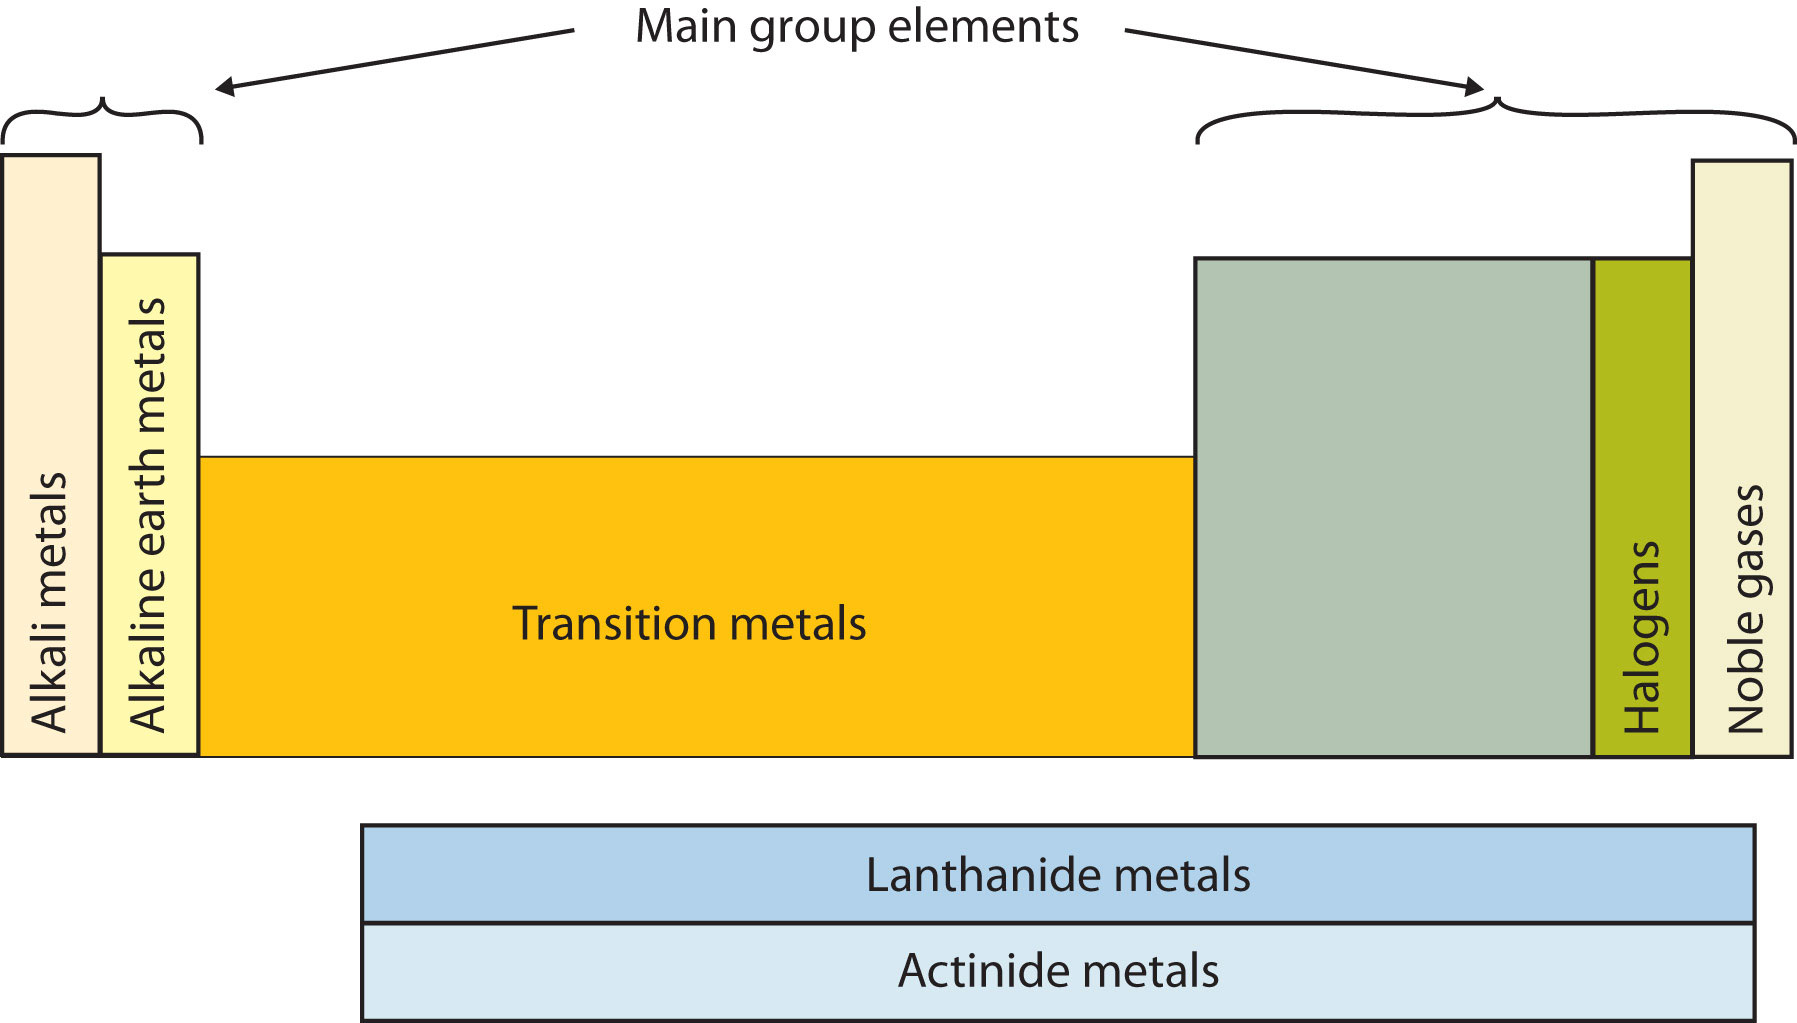 Sections of period table: Alkali metals, alkaline earth metals, transition metals, halogens, noble gases, lanthanide metals, actinide metals.